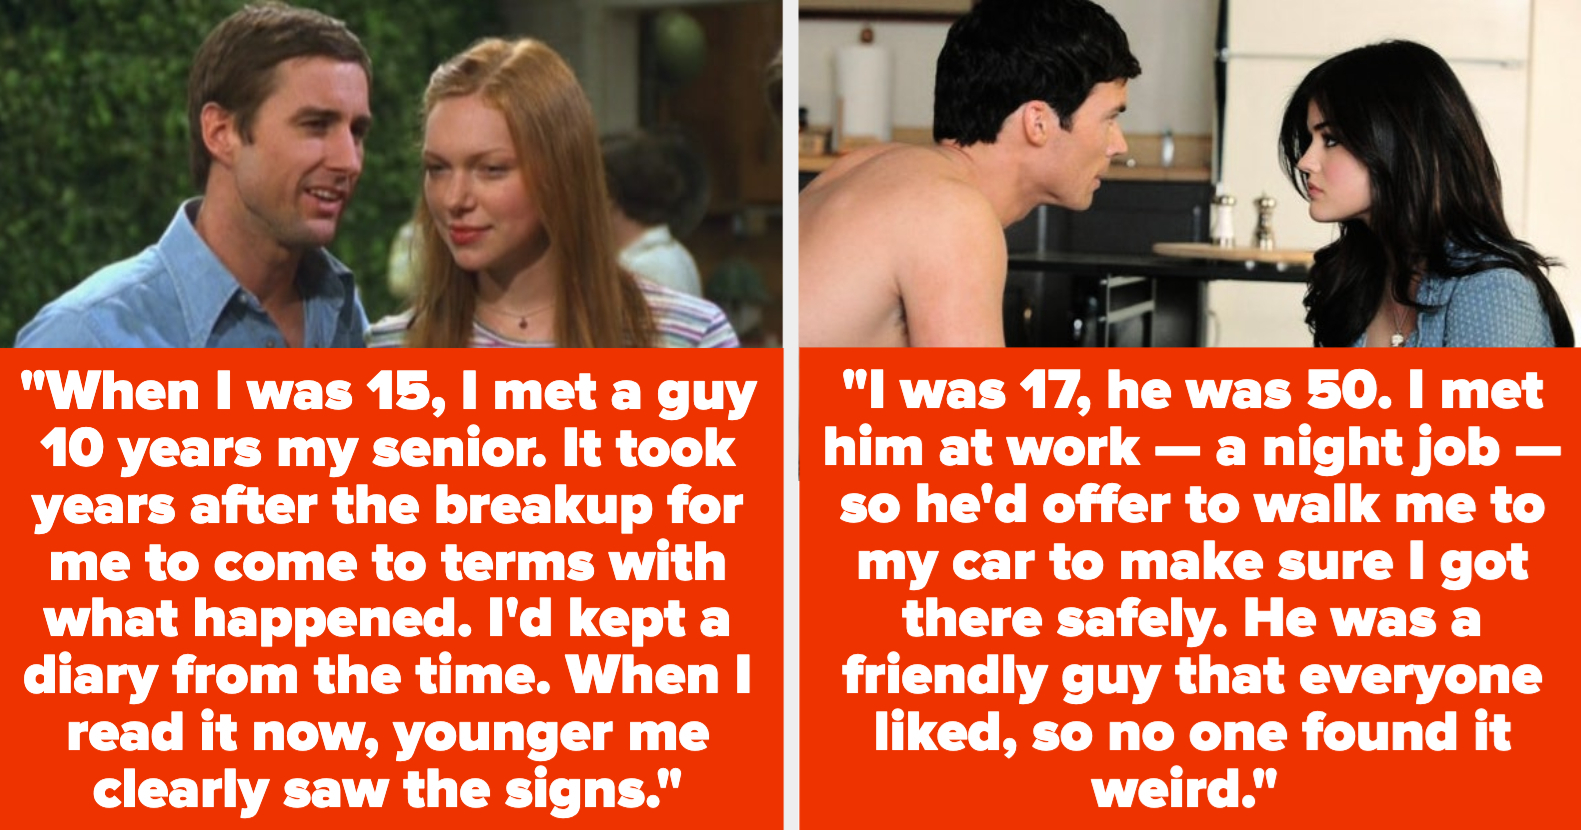 Women Who “Dated” Predatory Older Men As Teens Share Their Stories picture